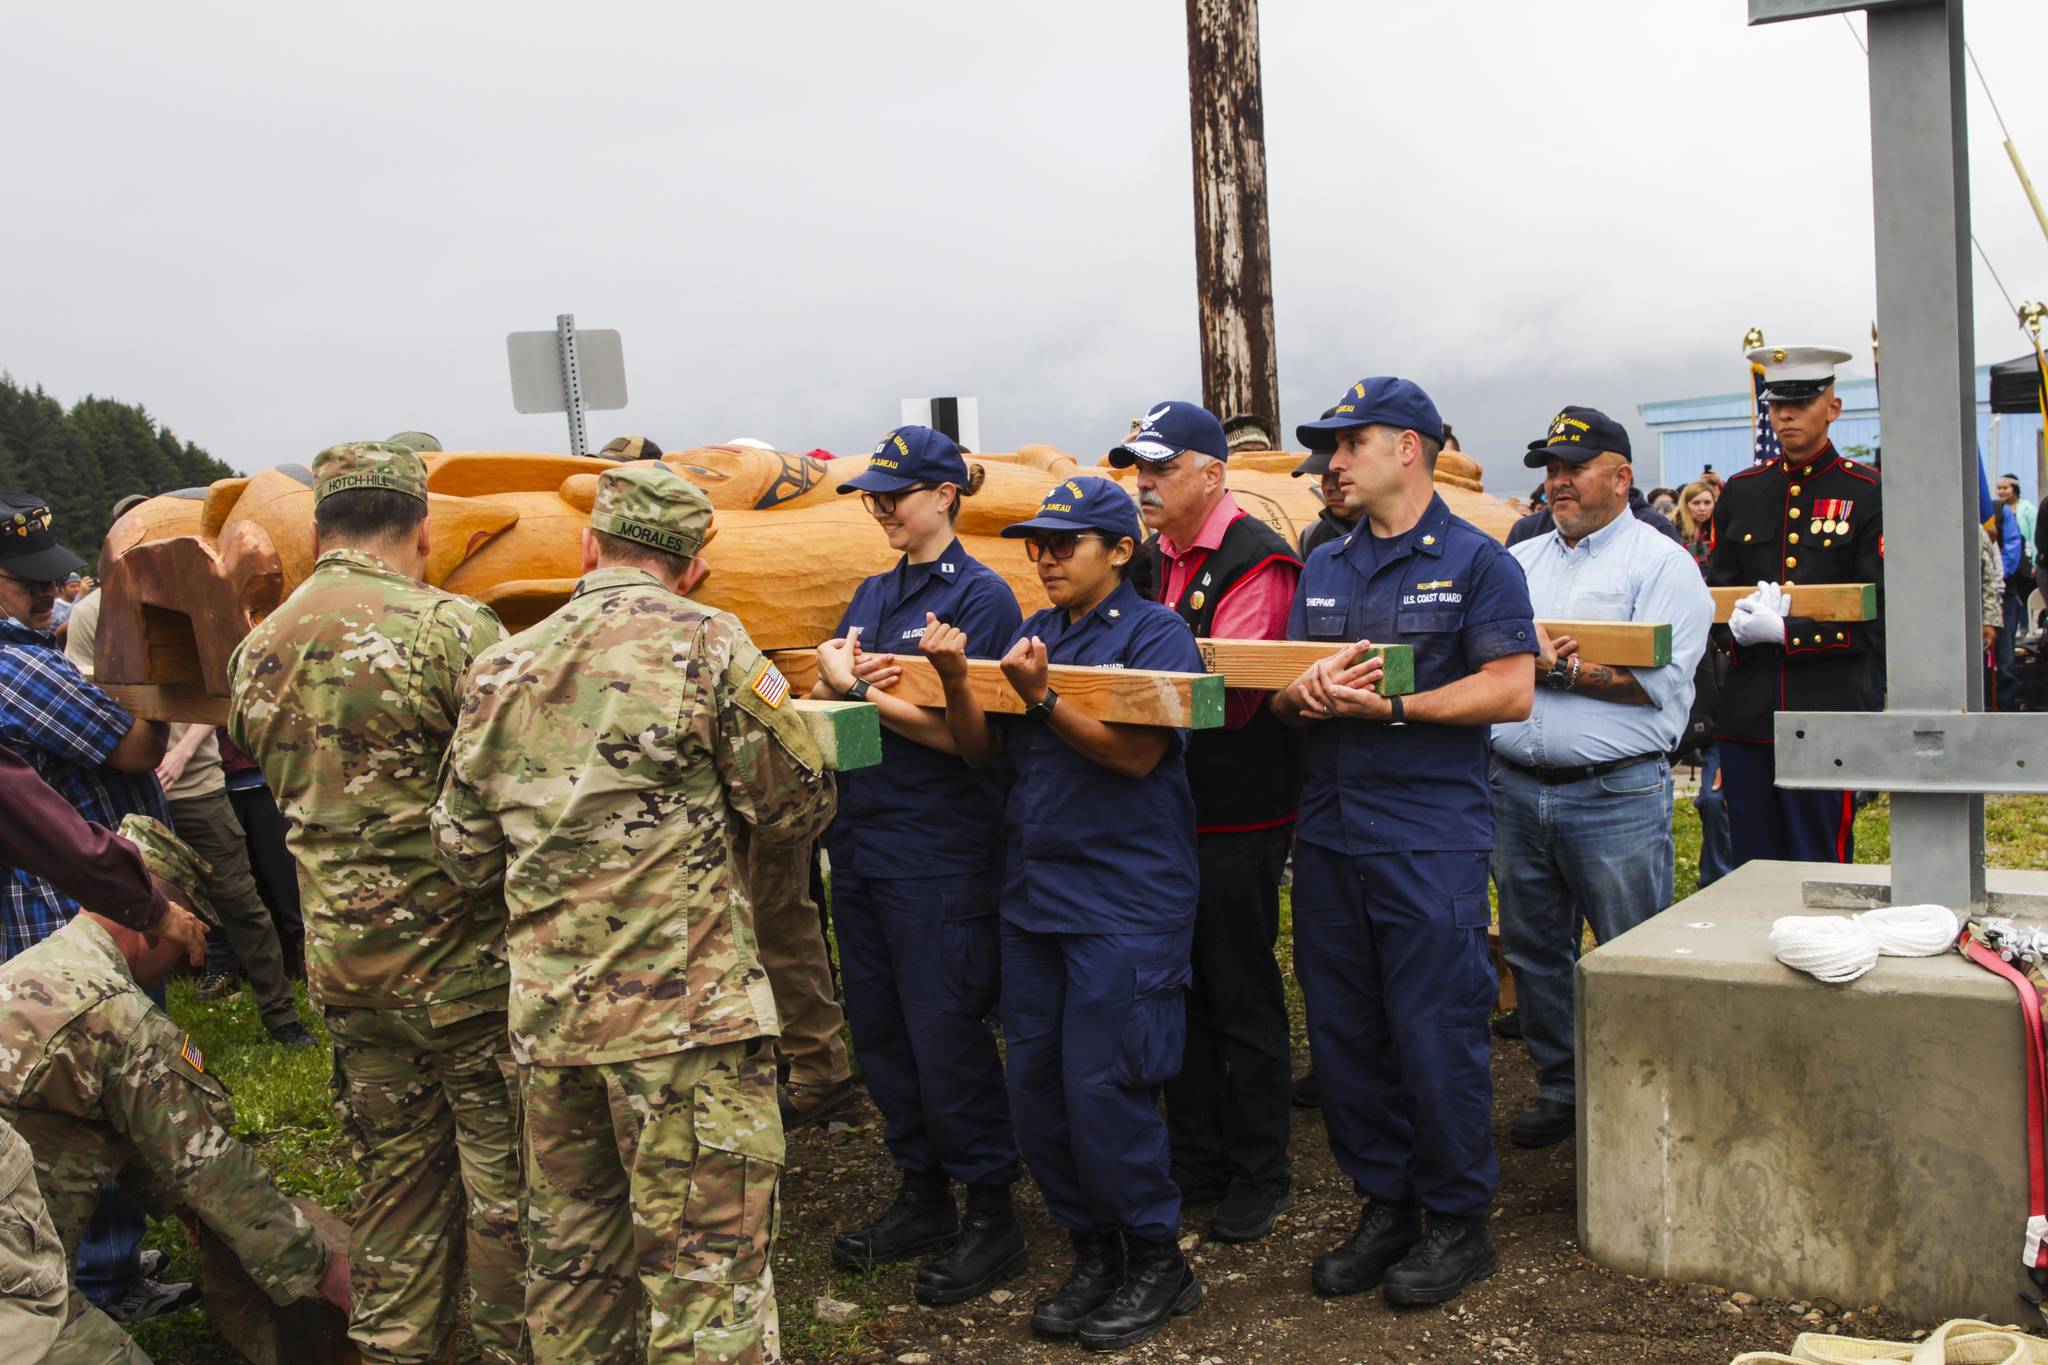 Veterans and active duty servicemembers, including Coast Guardsmen from Coast Guard Sector Juneau, carry a totem pole honoring veterans into place in Hoonah on July 24, 2021. (Michael S. Lockett / Juneau Empire)